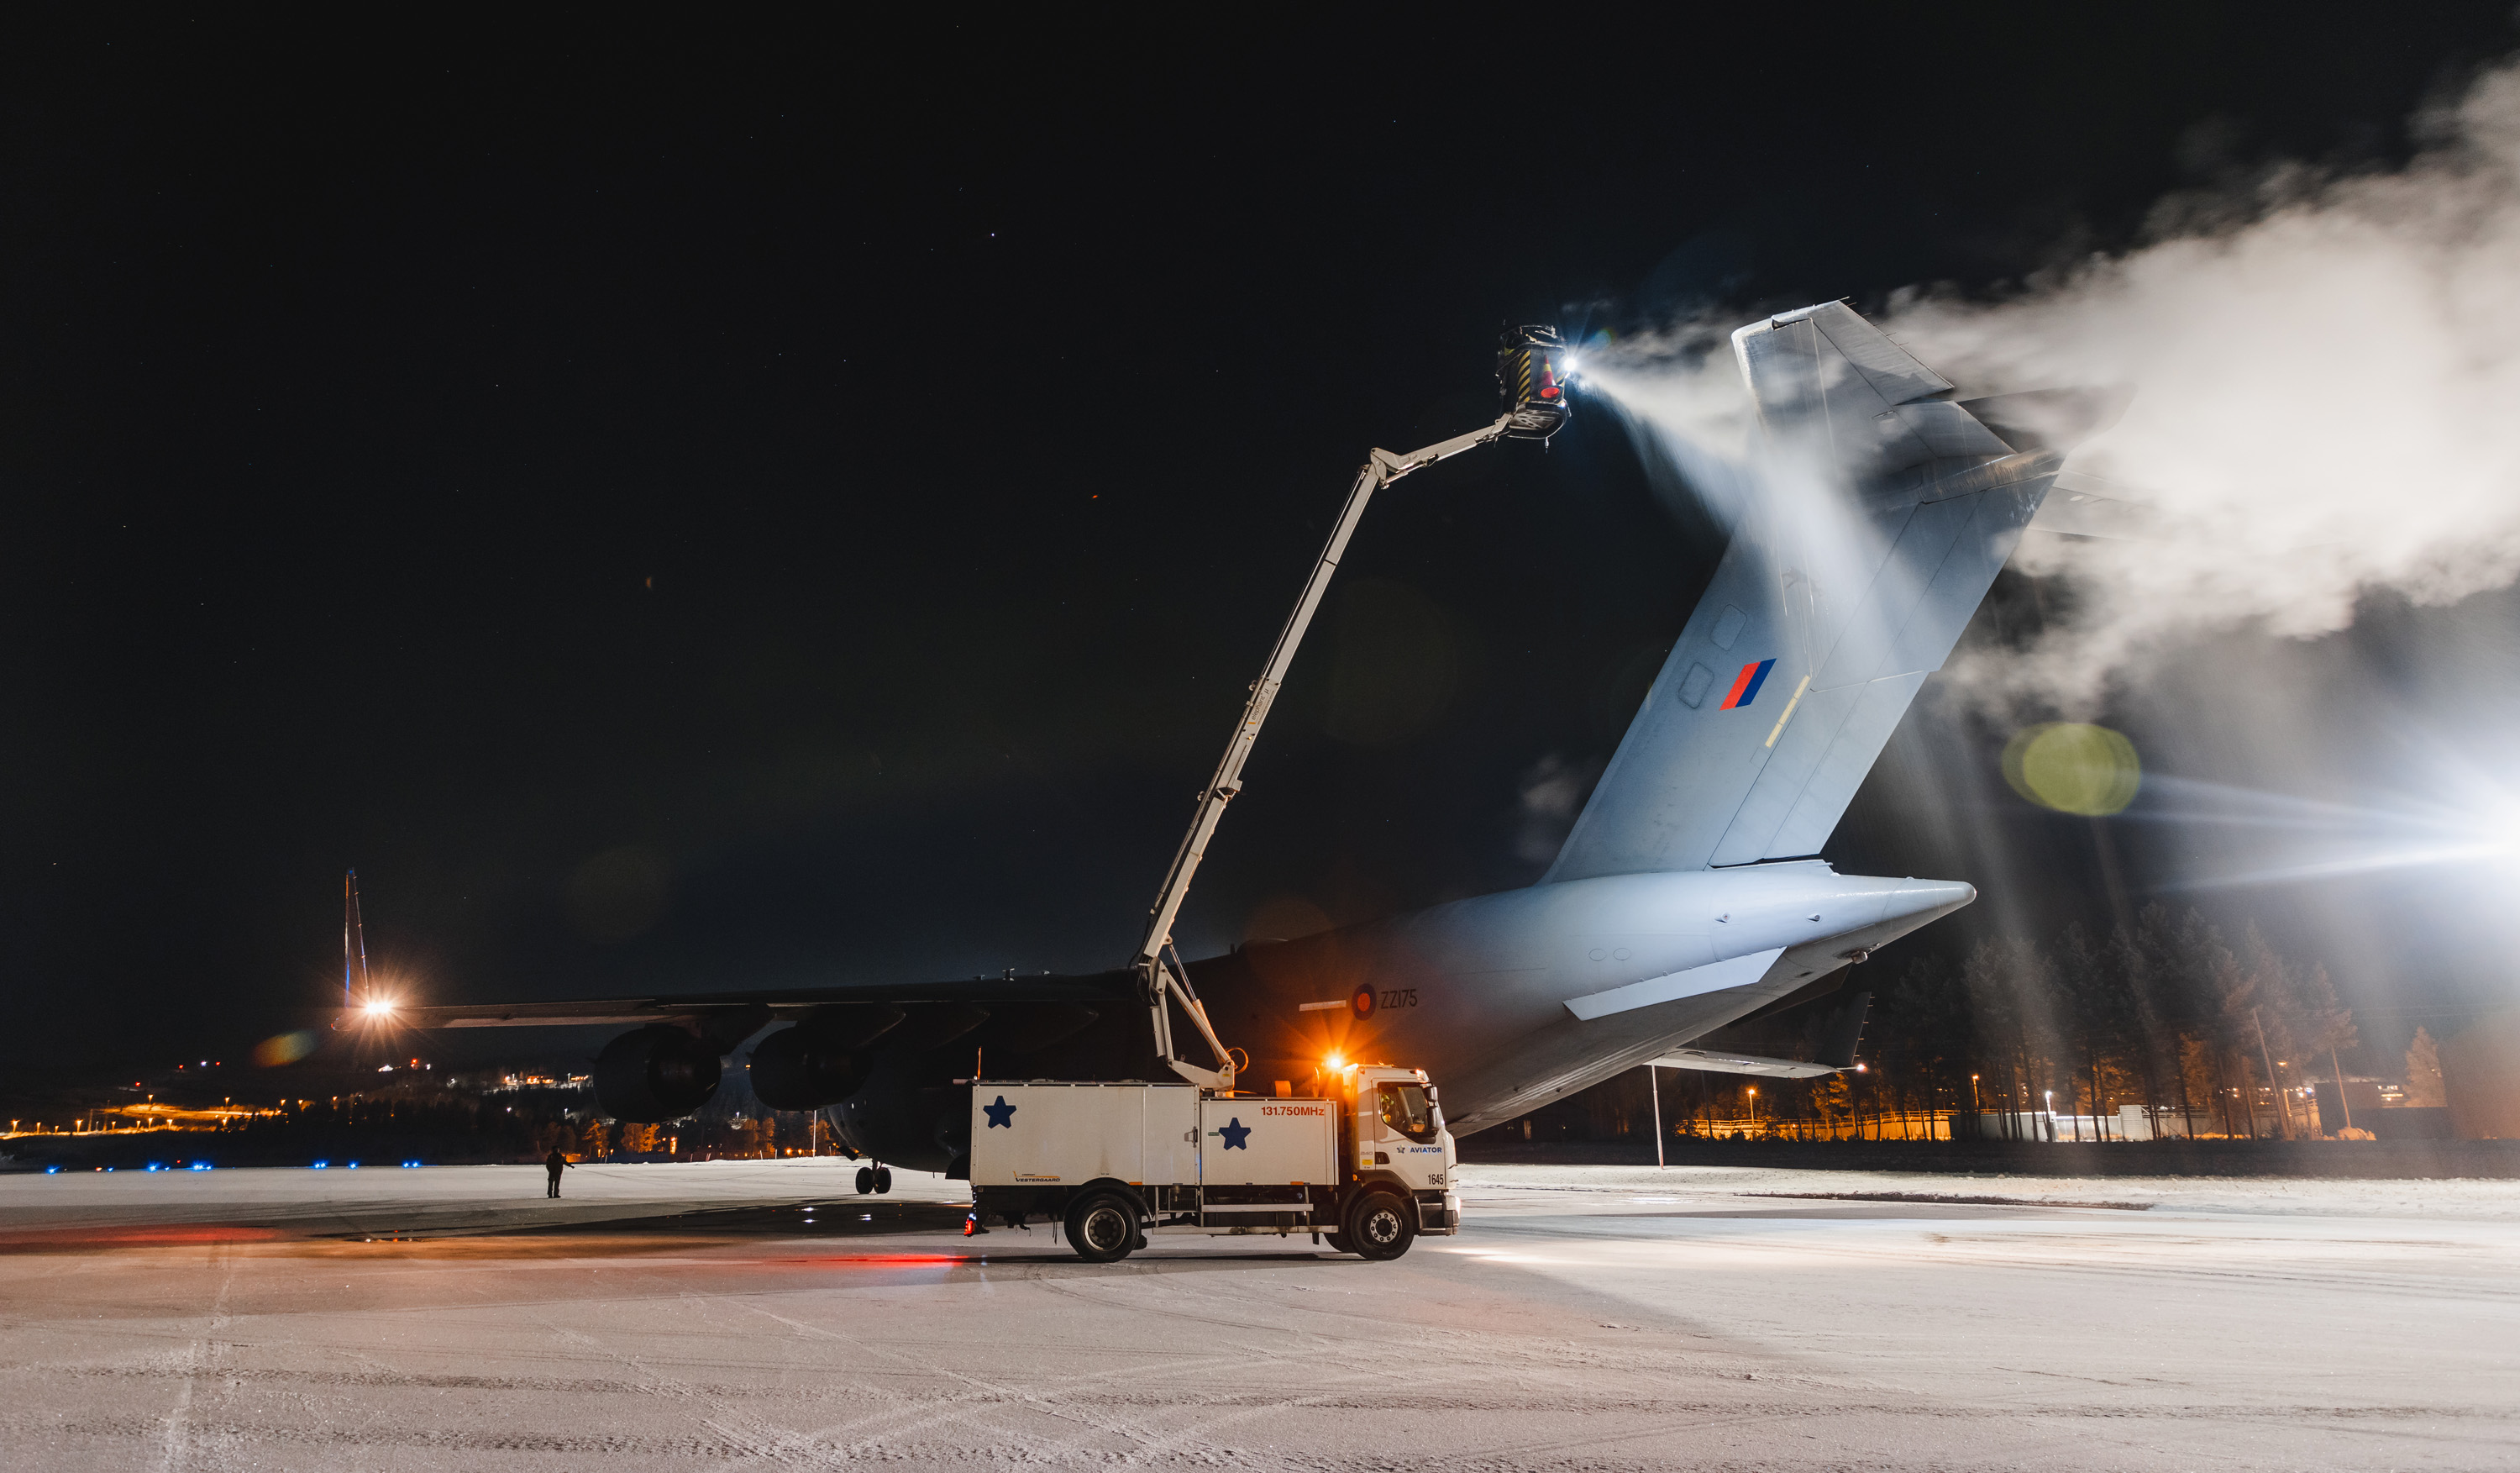 Image shows RAF Globemaster on the airfield, being de-iced by truck.